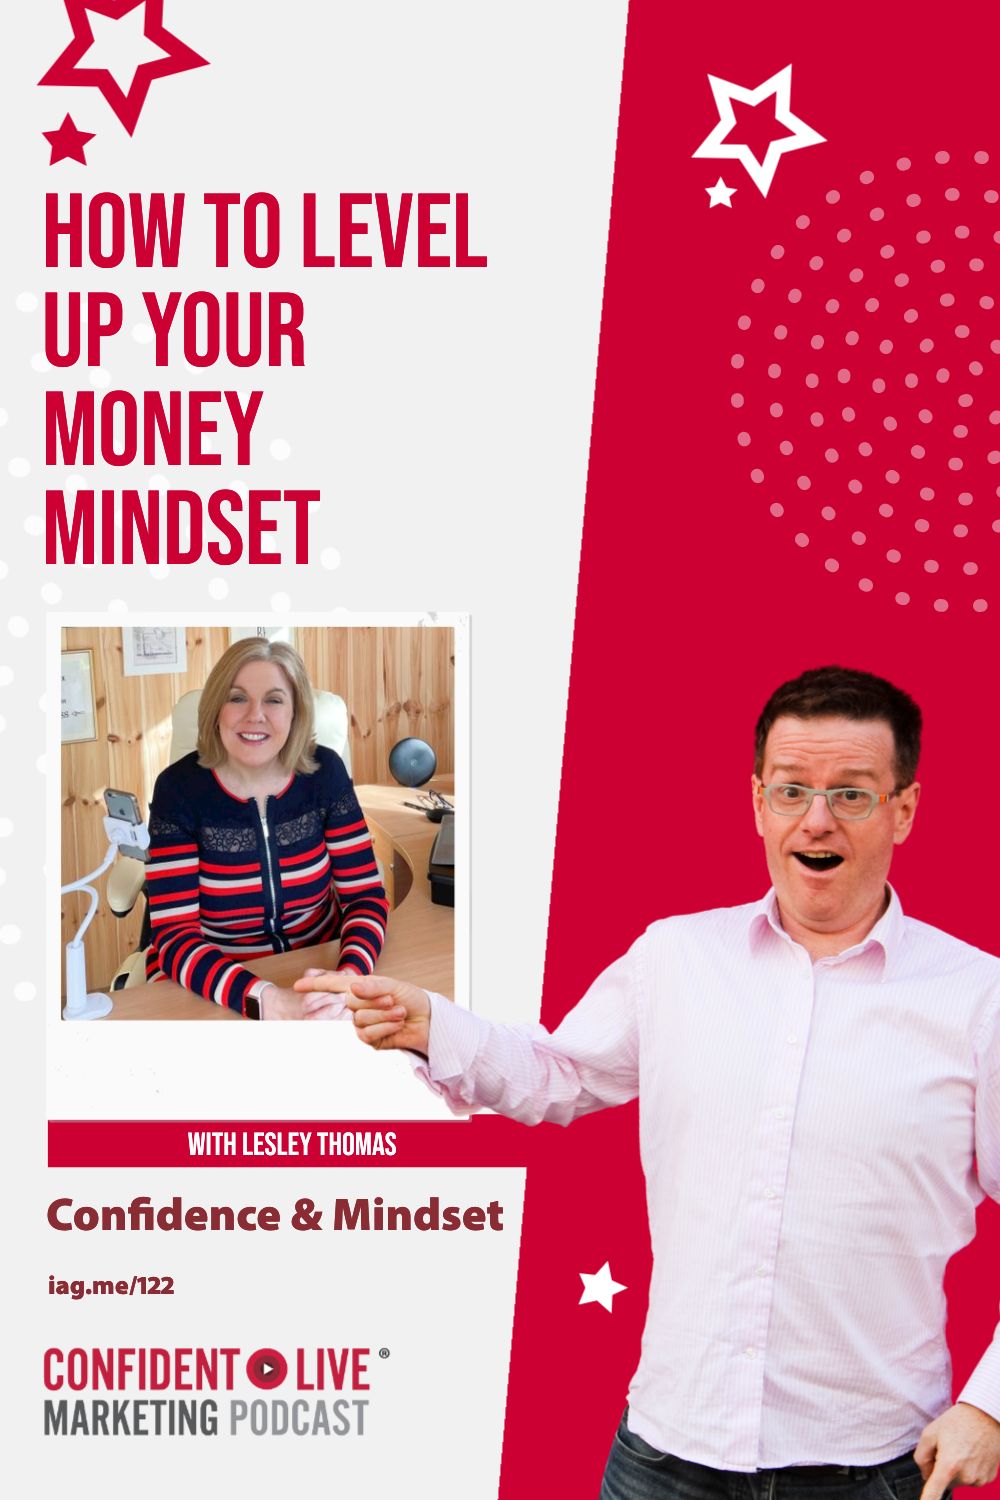 How to Level Up Your Money Mindset